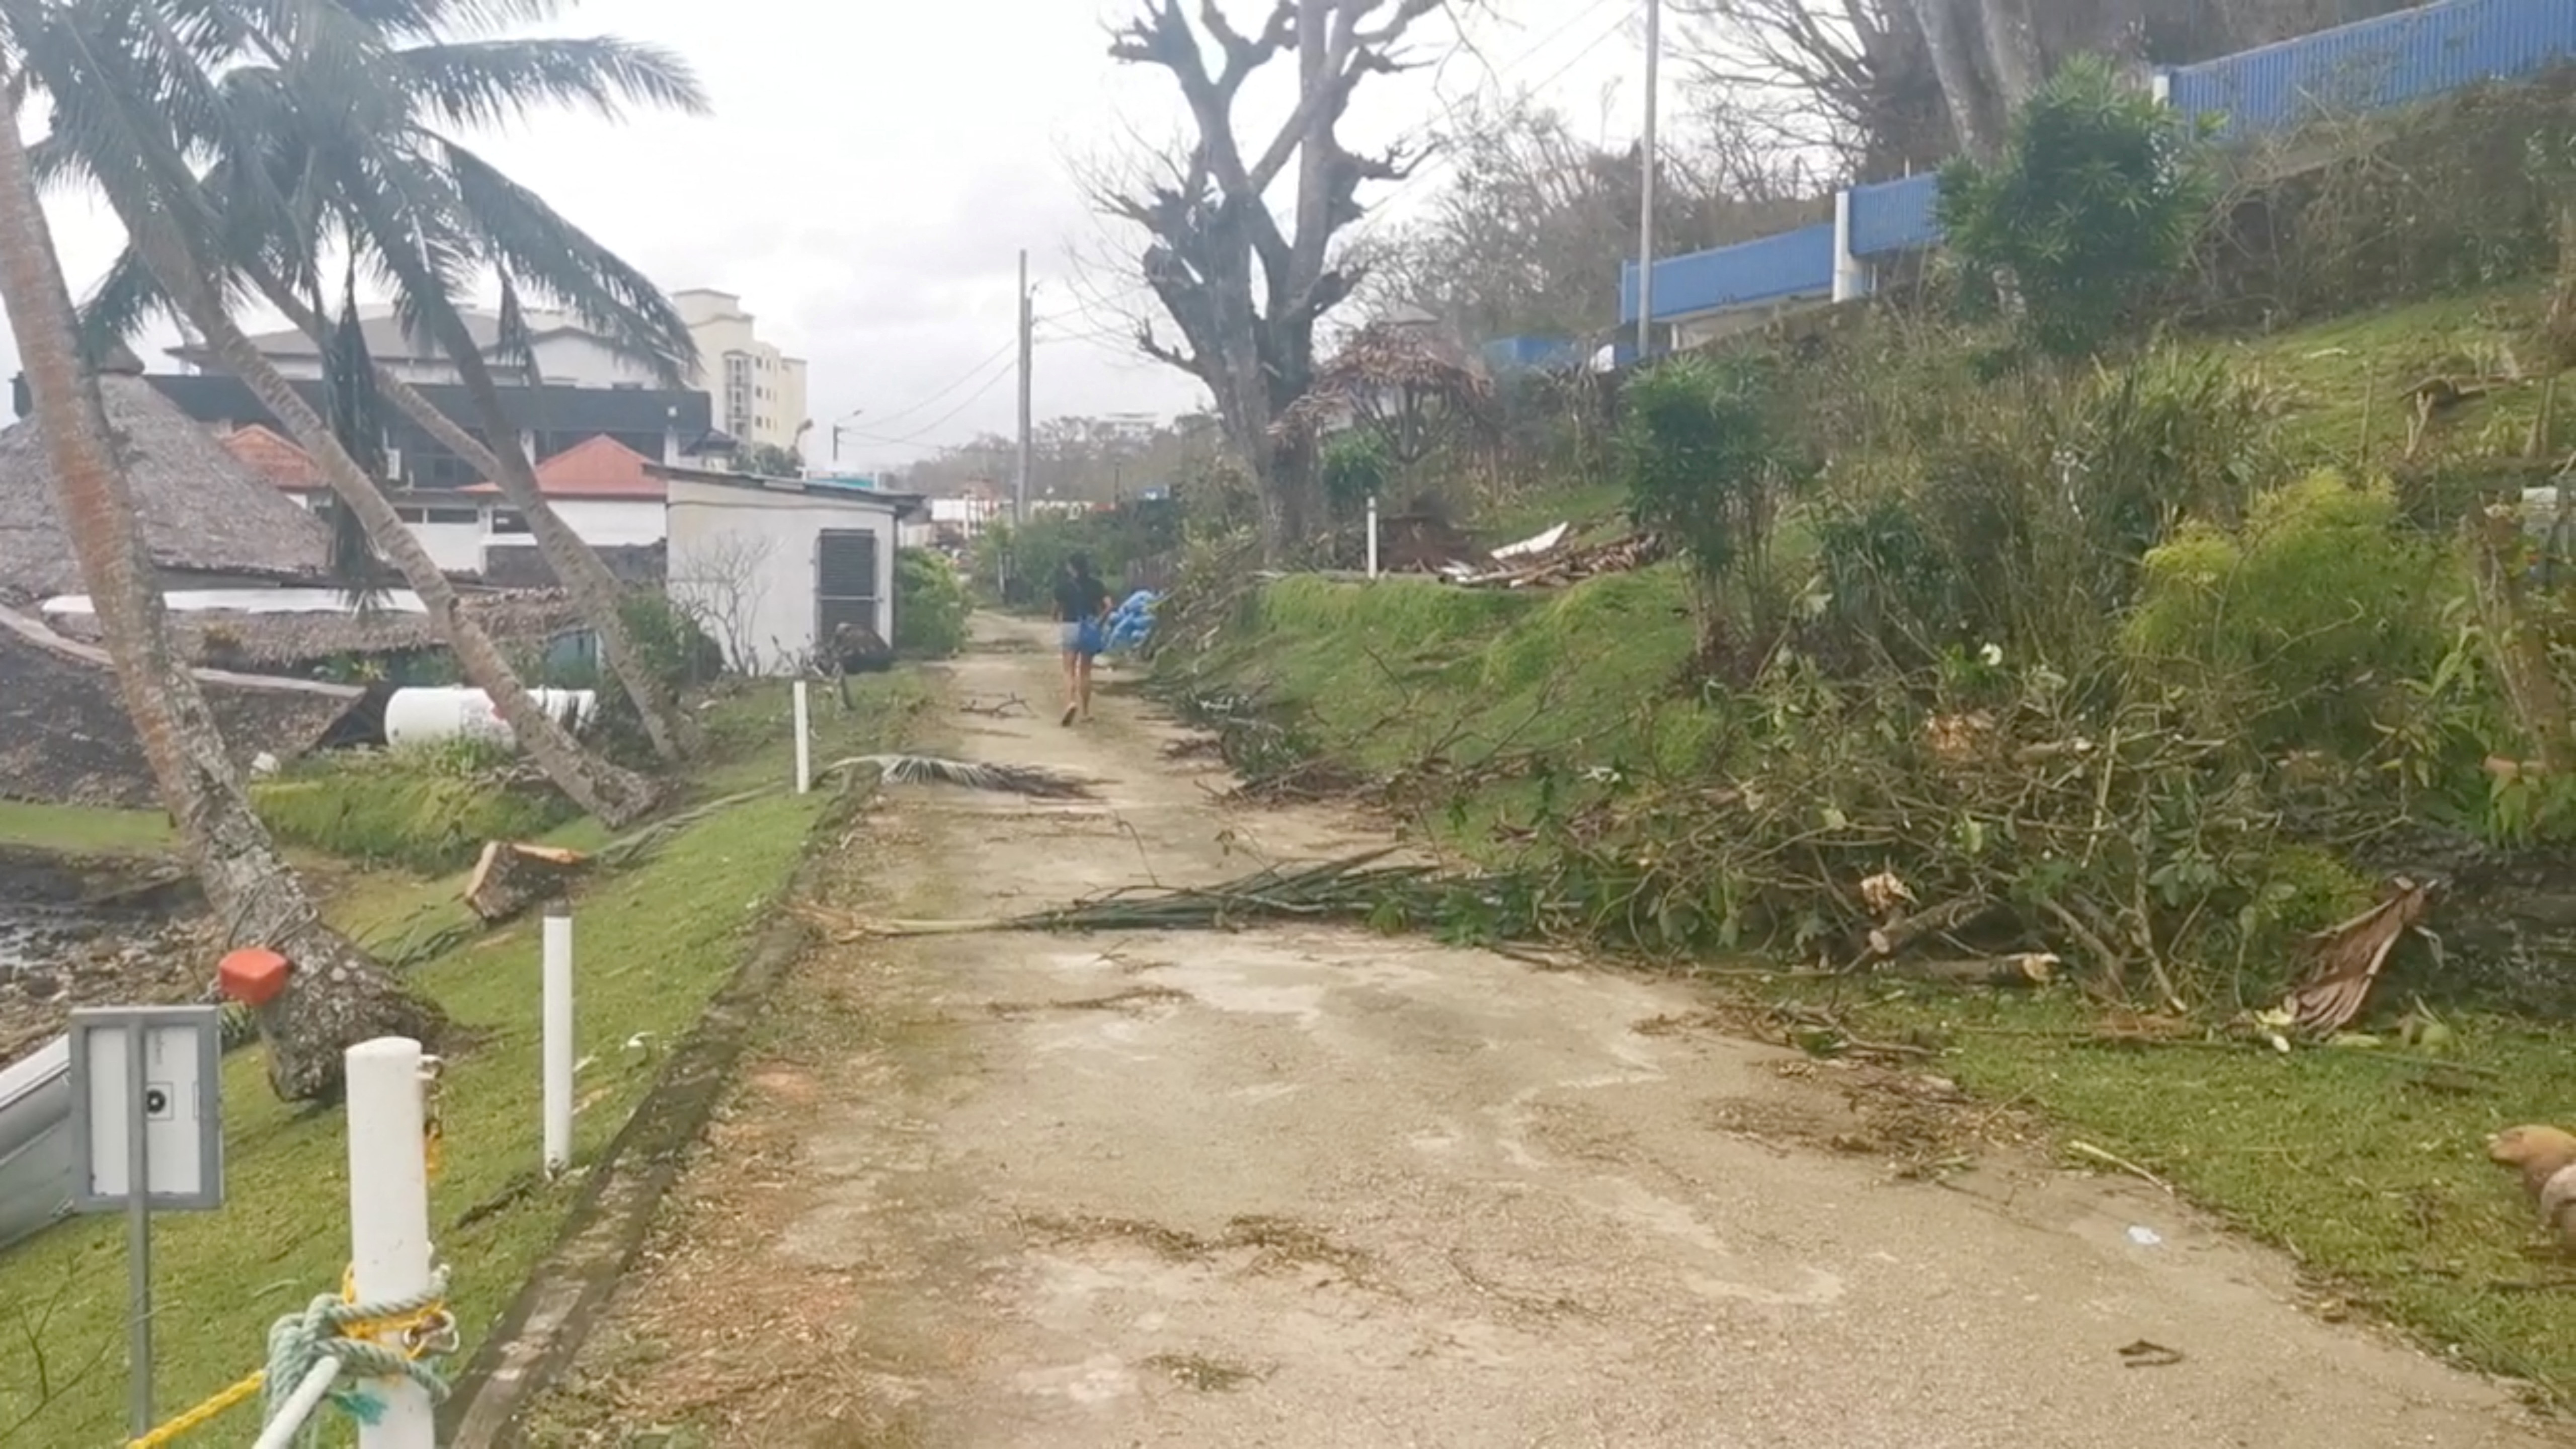 A view of the damage in the aftermath of cyclone Kevin, in Port Vila